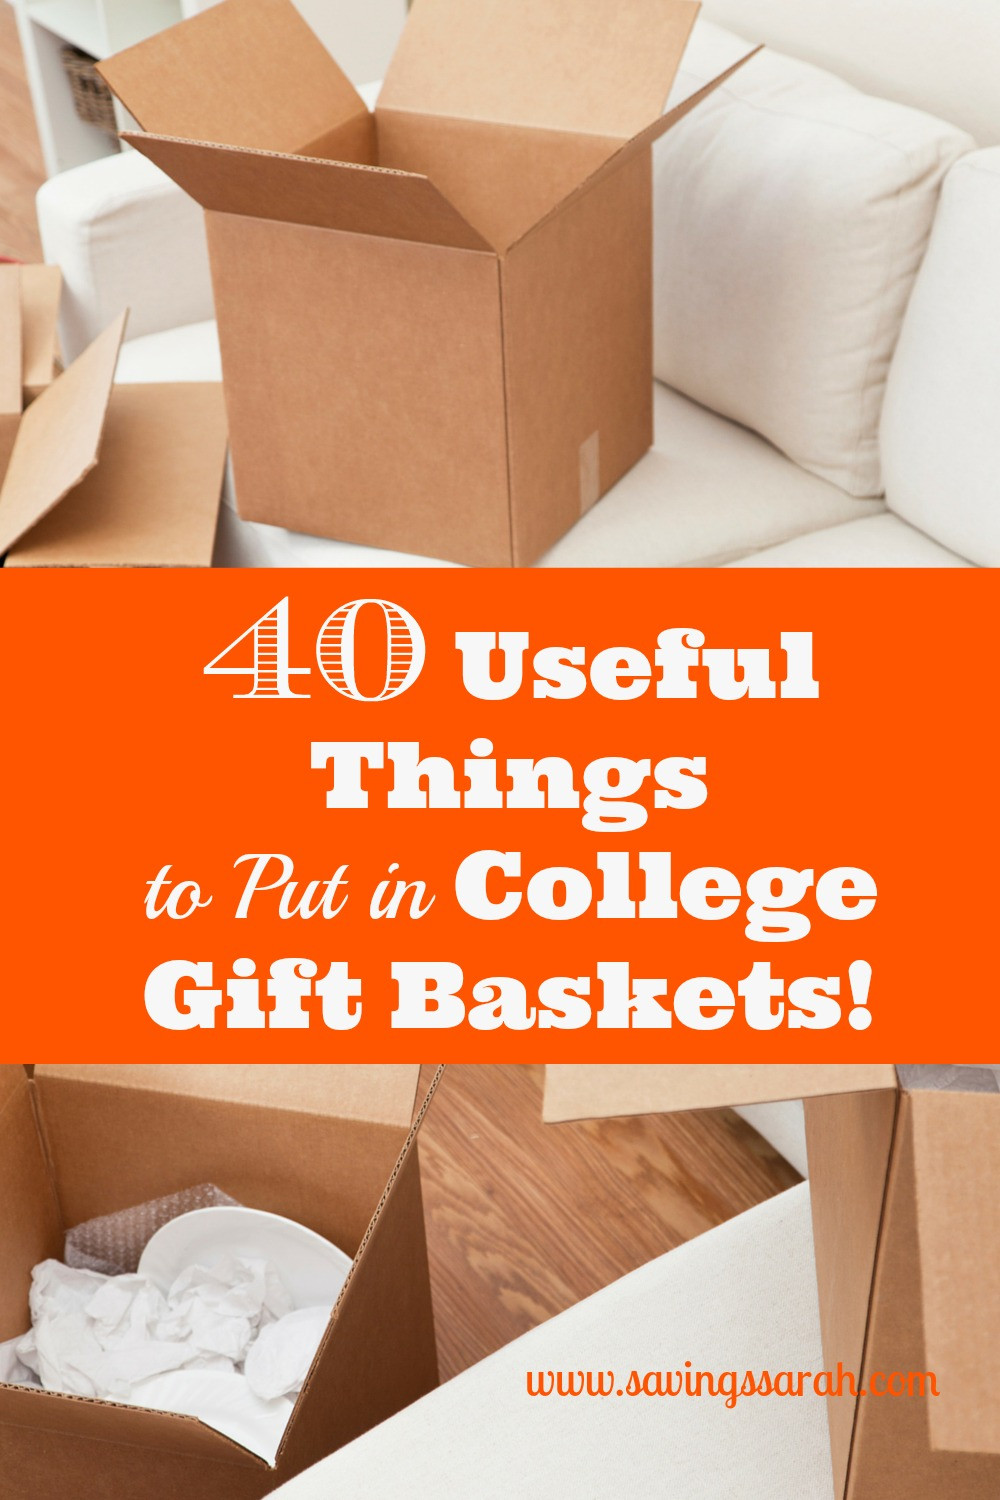 Going To College Gift Basket Ideas
 40 Useful Things to Put in College Gift Baskets Earning